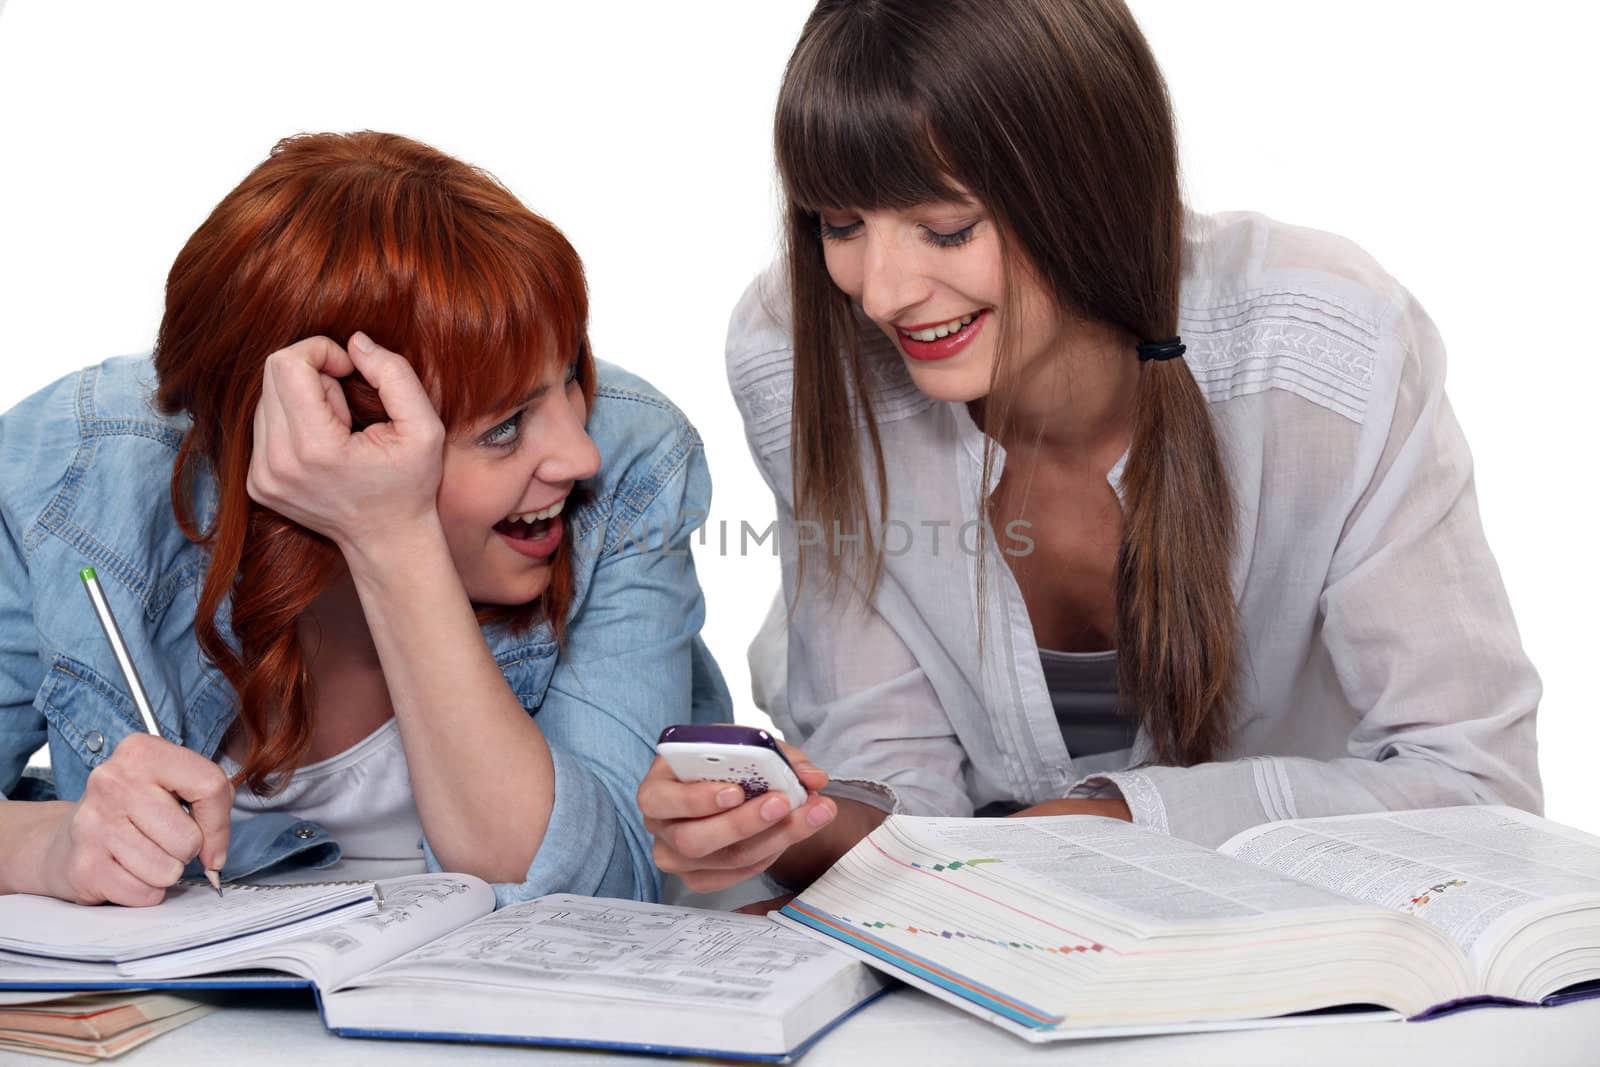 two girlfriends studying and having fun together